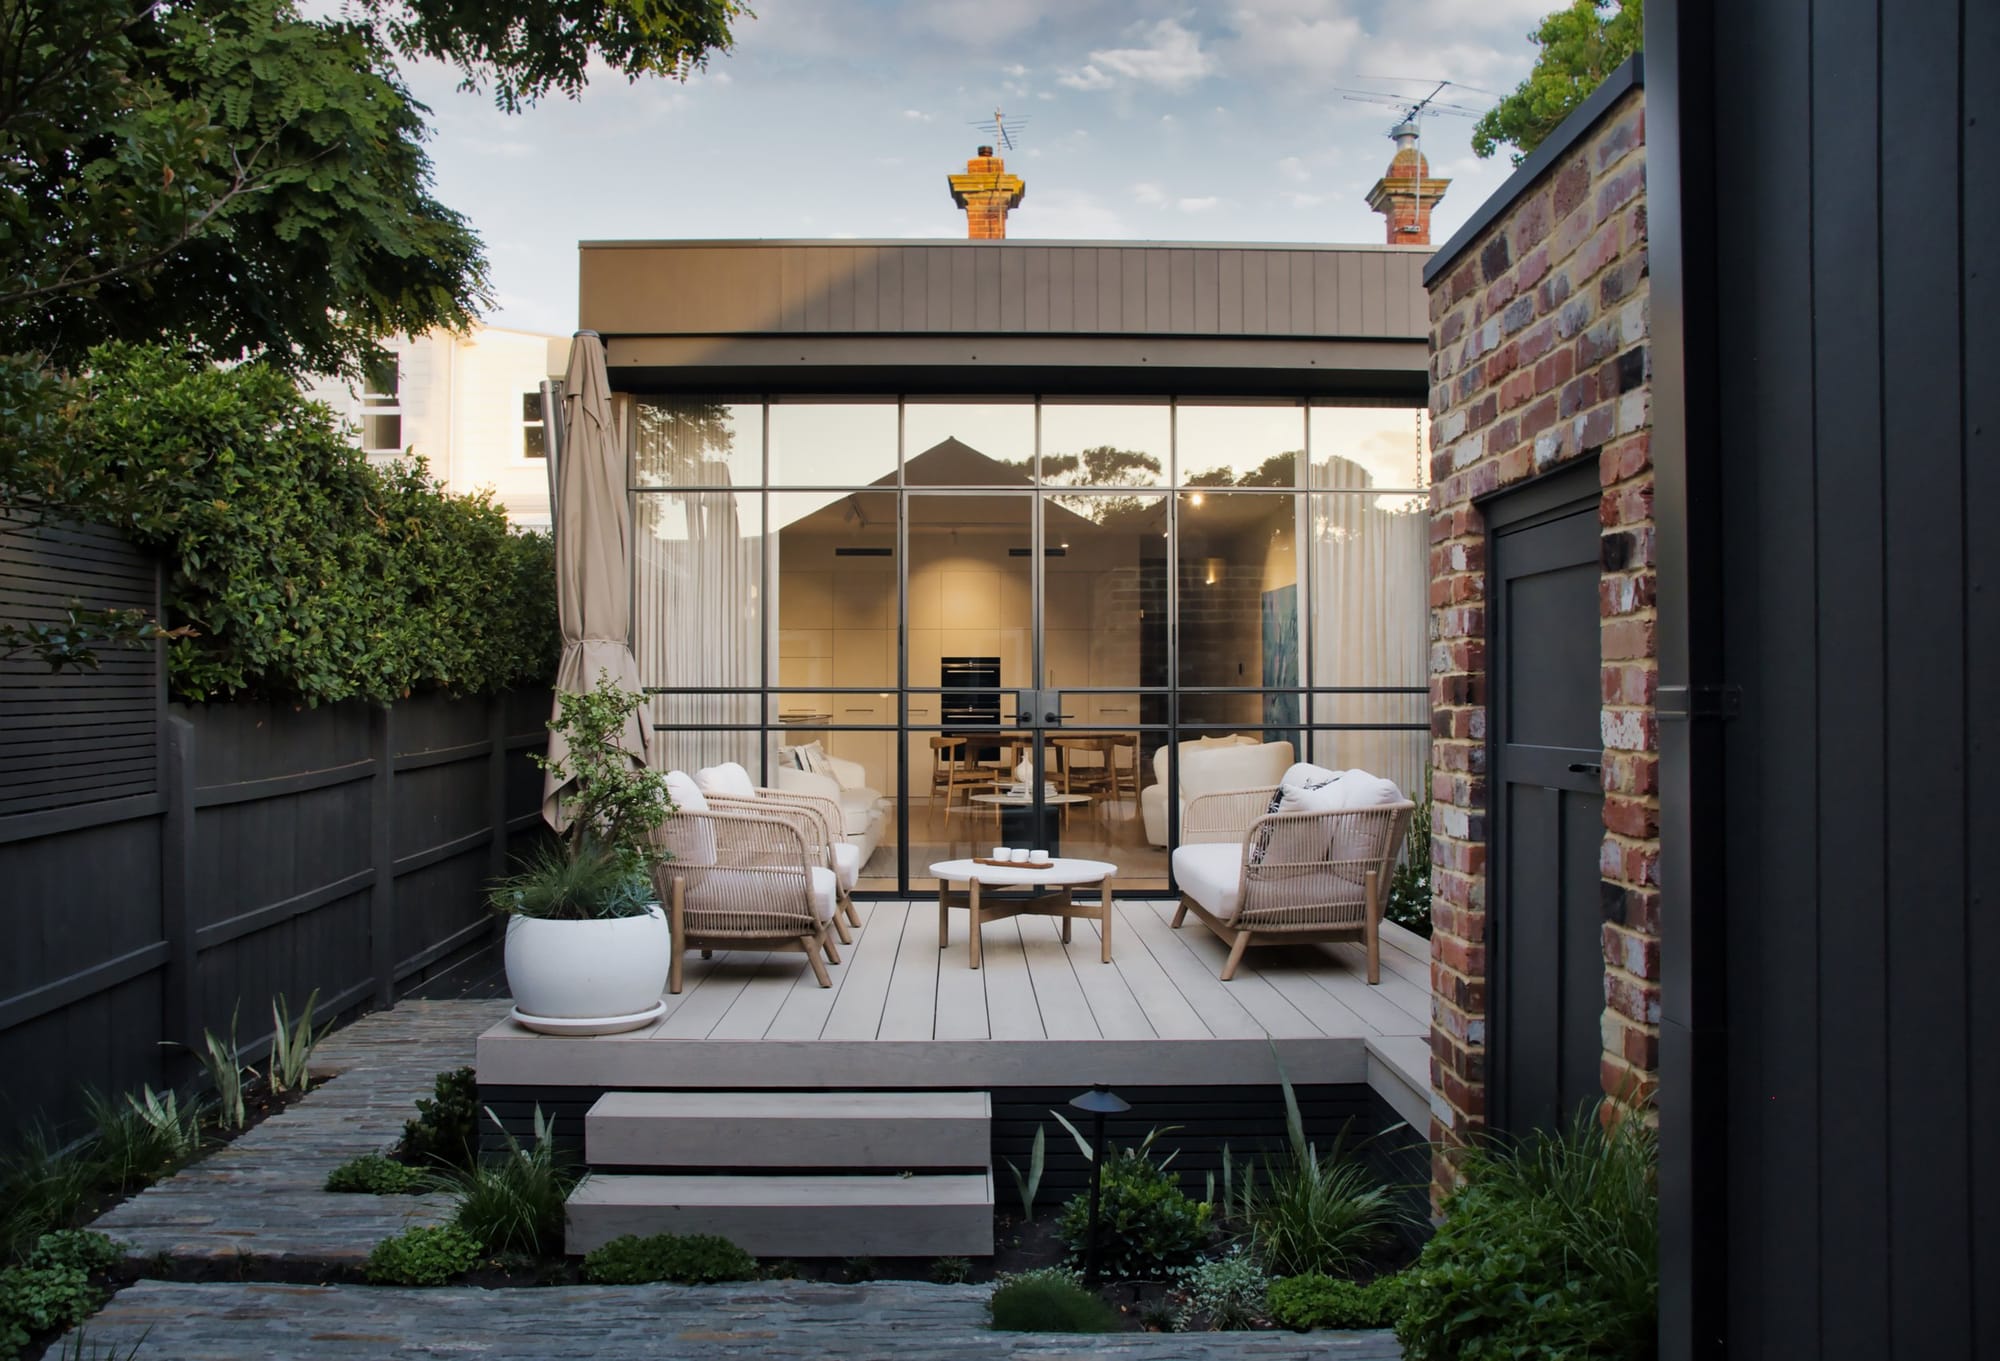 Sewell Street by ST. HELIER STUDIO. Imagery copyright of ST. HELIER STUDIO. Patio with rattan furniture in front of full length glass windows. 